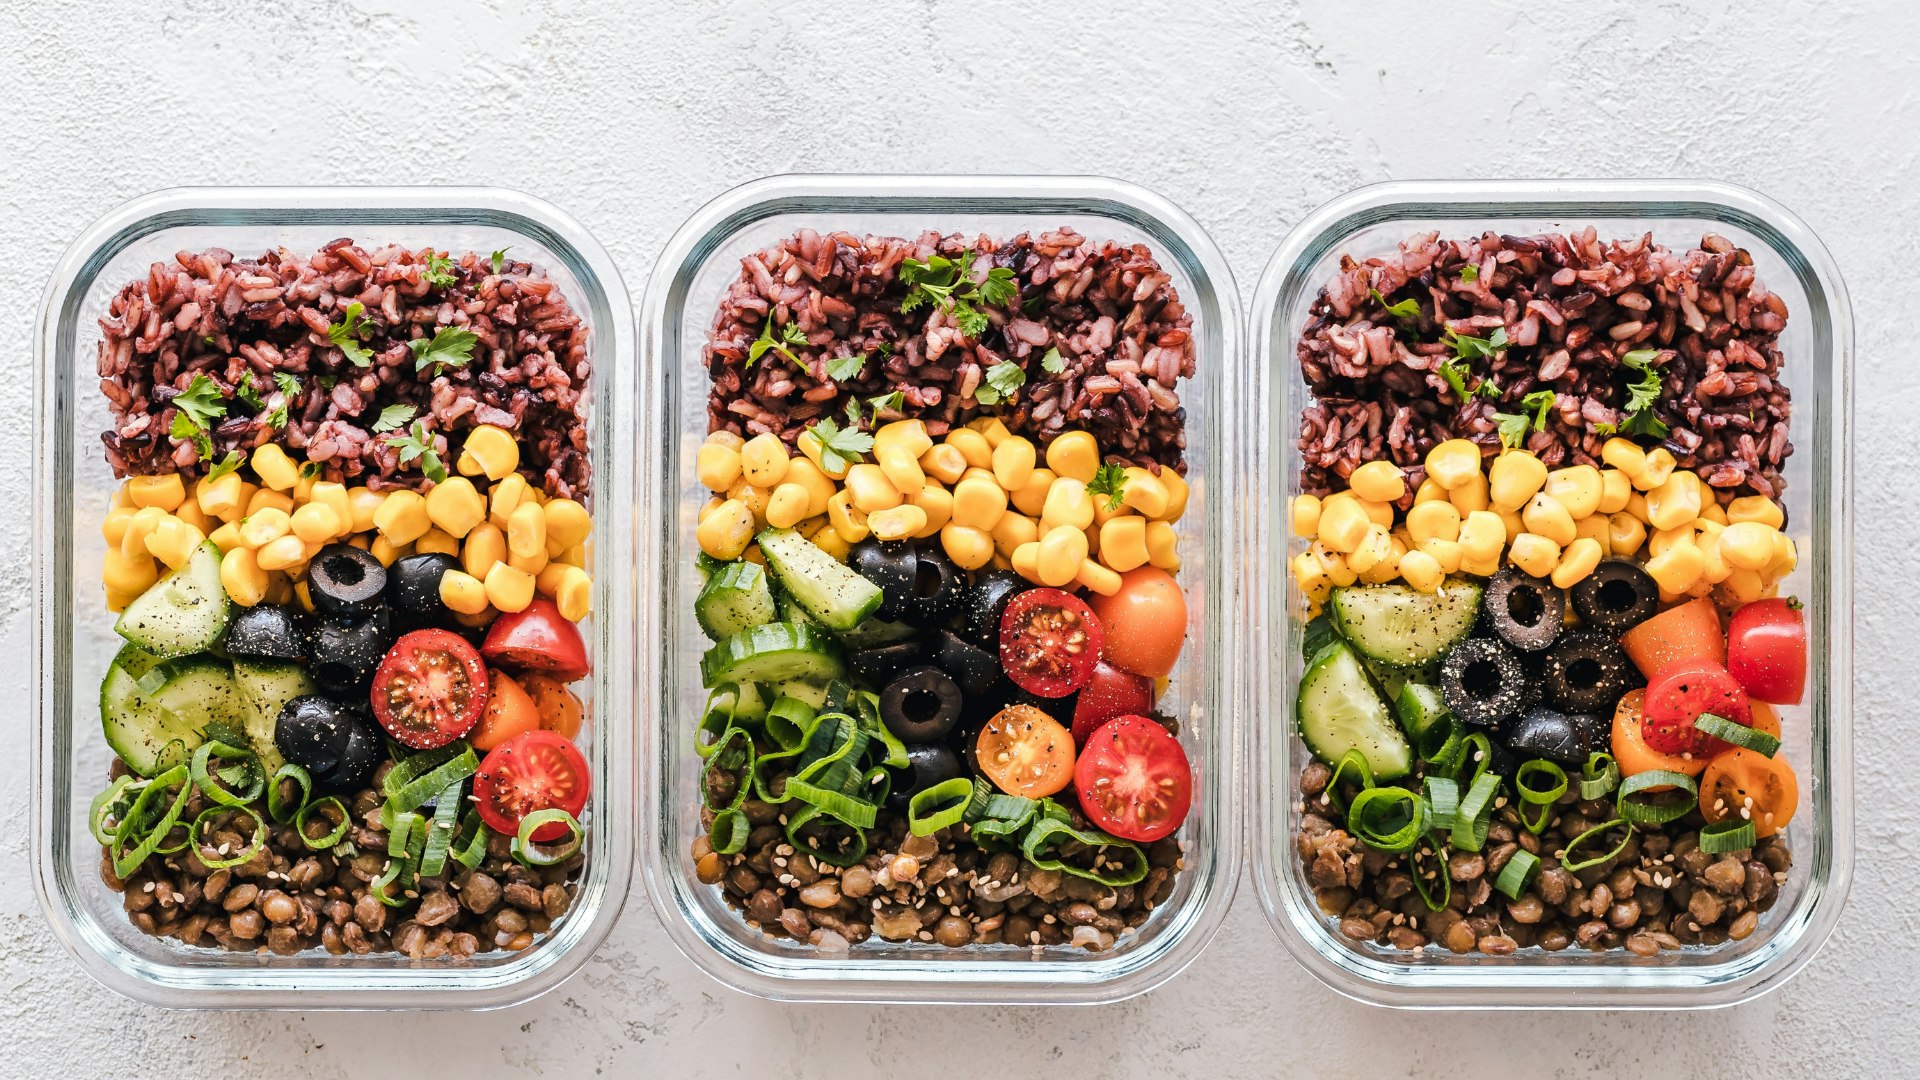 https://images.bauerhosting.com/legacy/media/614a/ee86/4699/e01a/bef2/de94/best-meal-prep-containers.png?ar=16%3A9&fit=crop&crop=top&auto=format&w=undefined&q=80